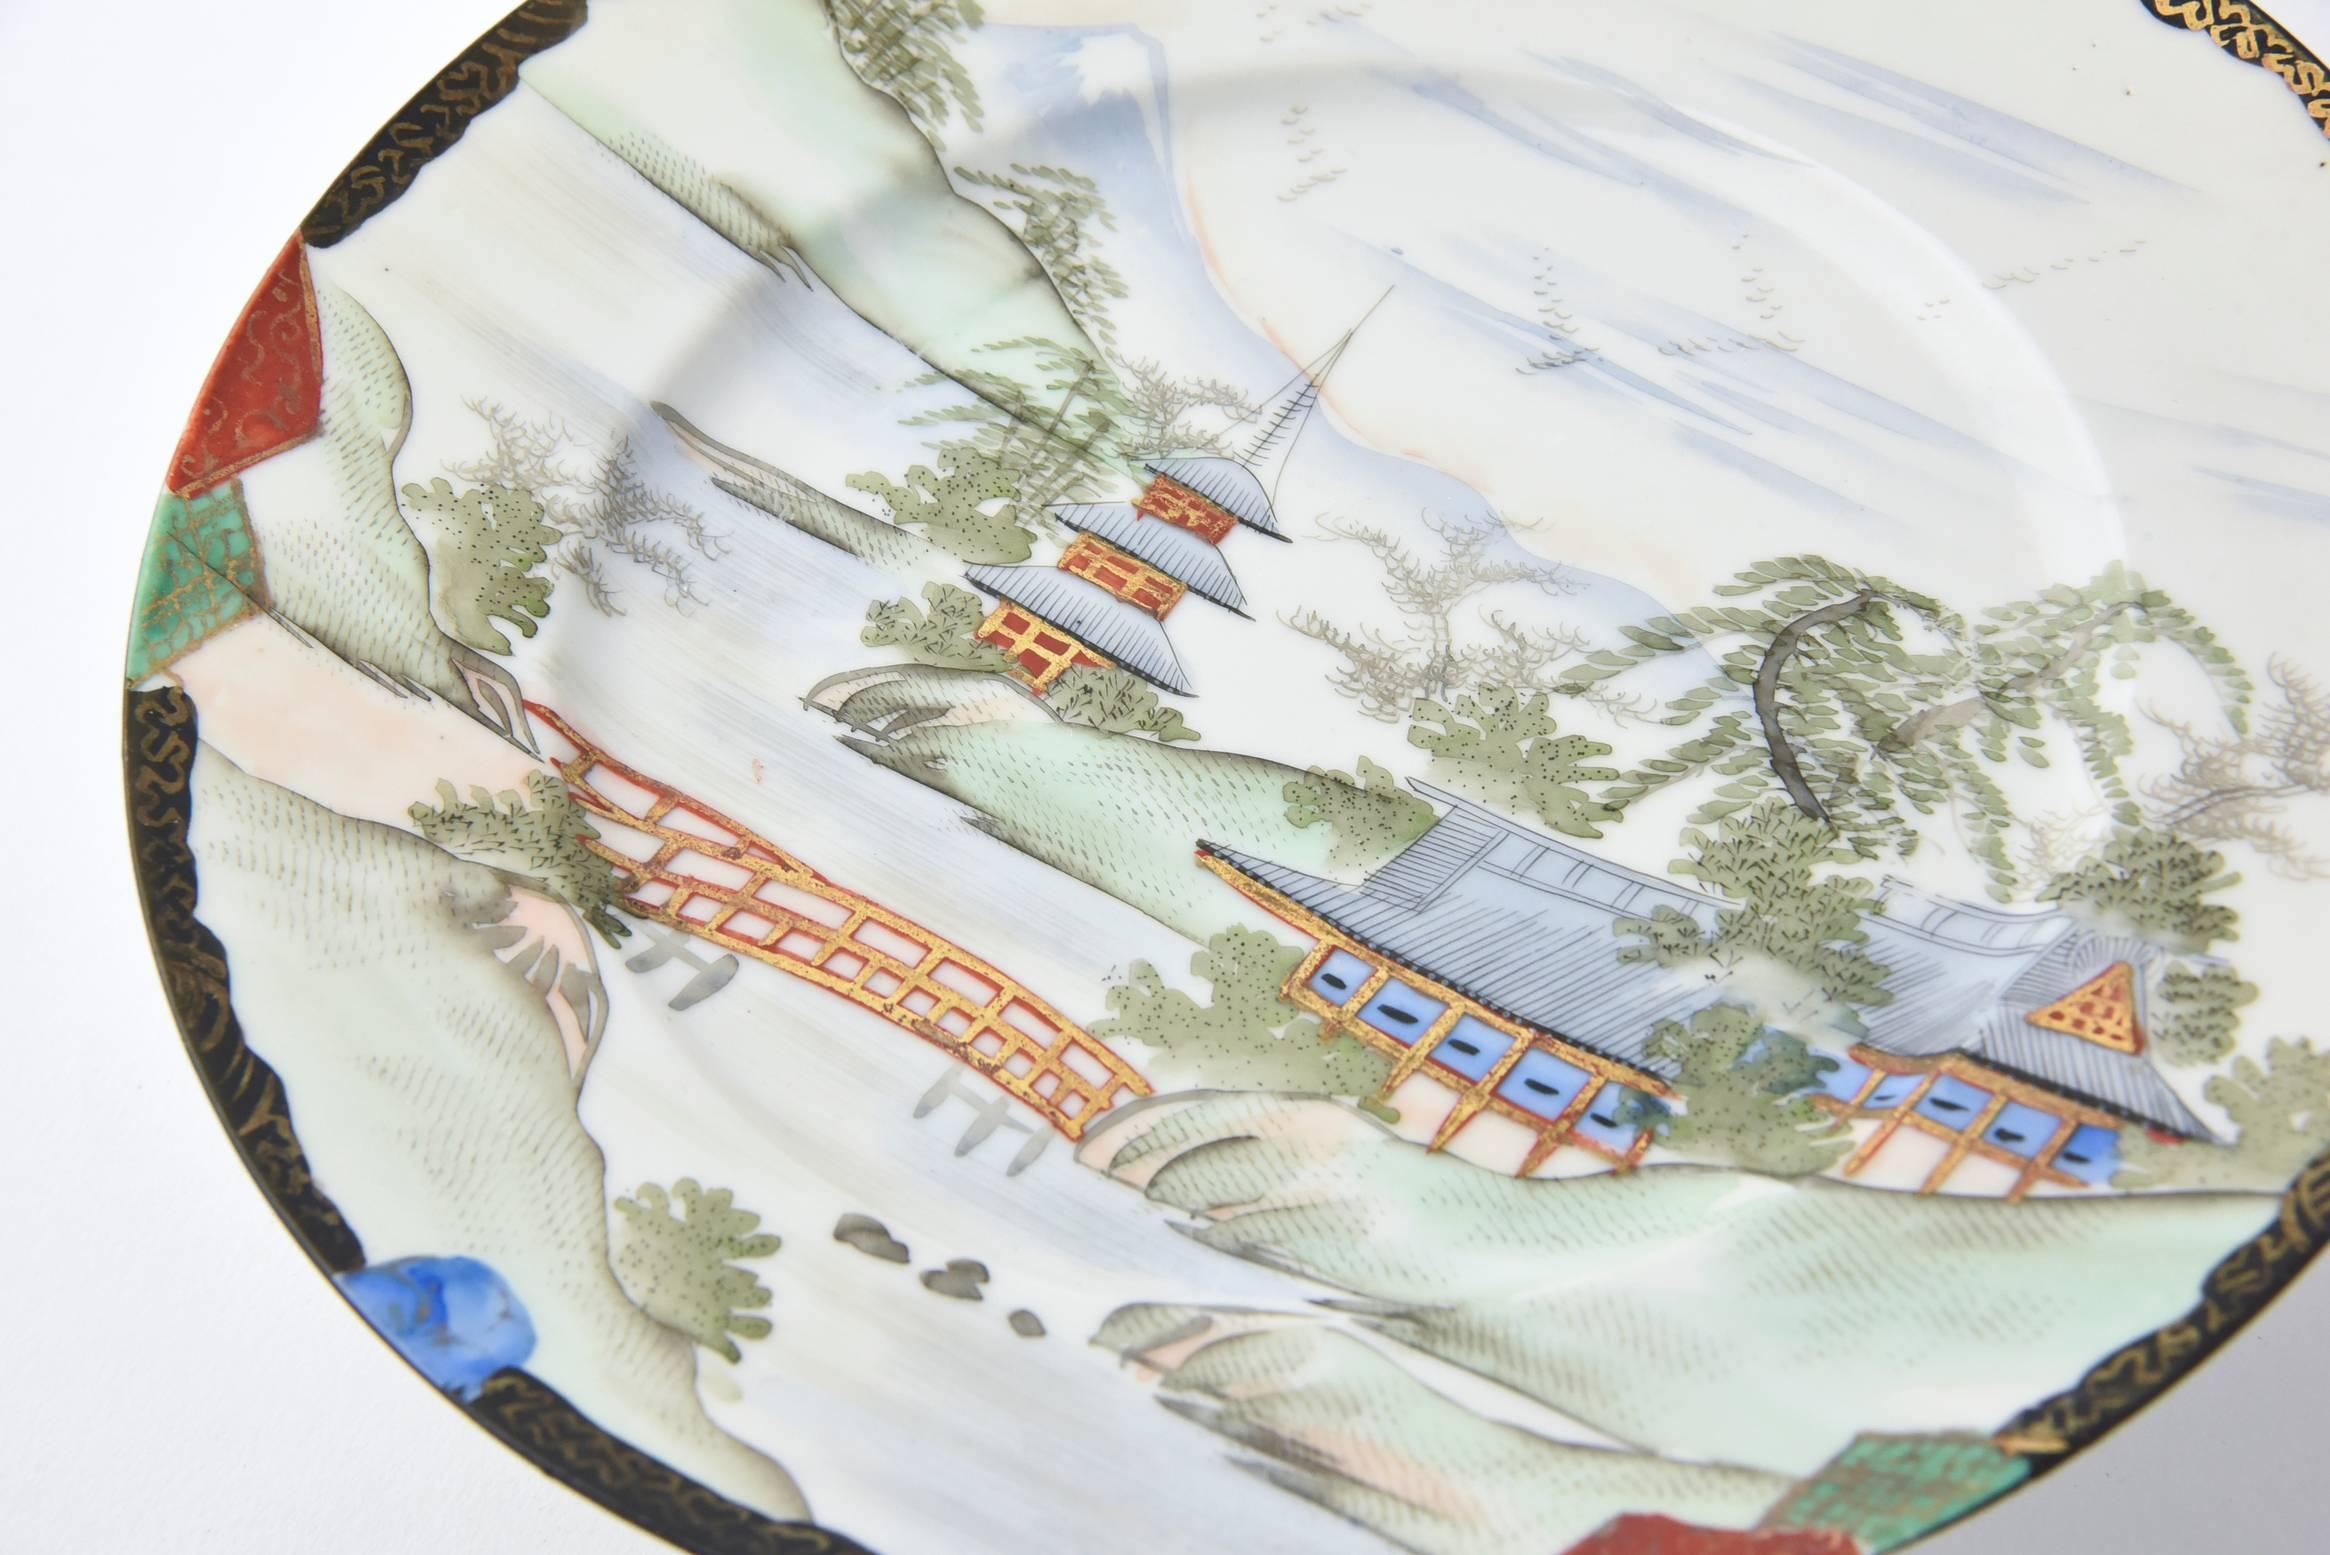 Pair of Japanese compotes hand-painted with Mount Fuji in the background of a classic Japanese village design. The village features a picturesque brook with a textured bridge accented by hidden pagodas in classic Japanese garden motif. The backs are